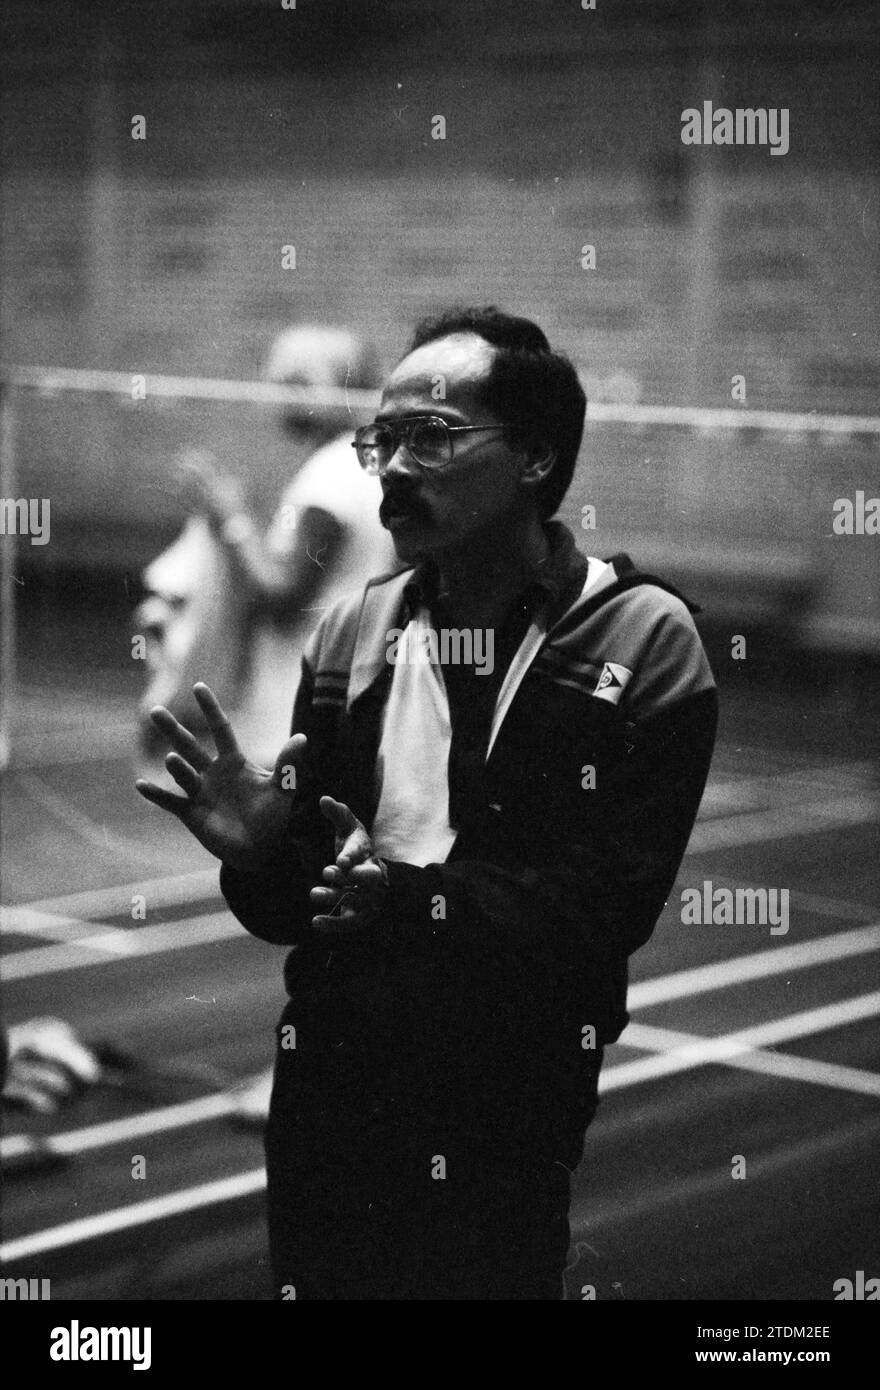 Badminton, 00-09-1980, Whizgle News from the Past, Tailored for the Future. Explore historical narratives, Dutch The Netherlands agency image with a modern perspective, bridging the gap between yesterday's events and tomorrow's insights. A timeless journey shaping the stories that shape our future Stock Photo